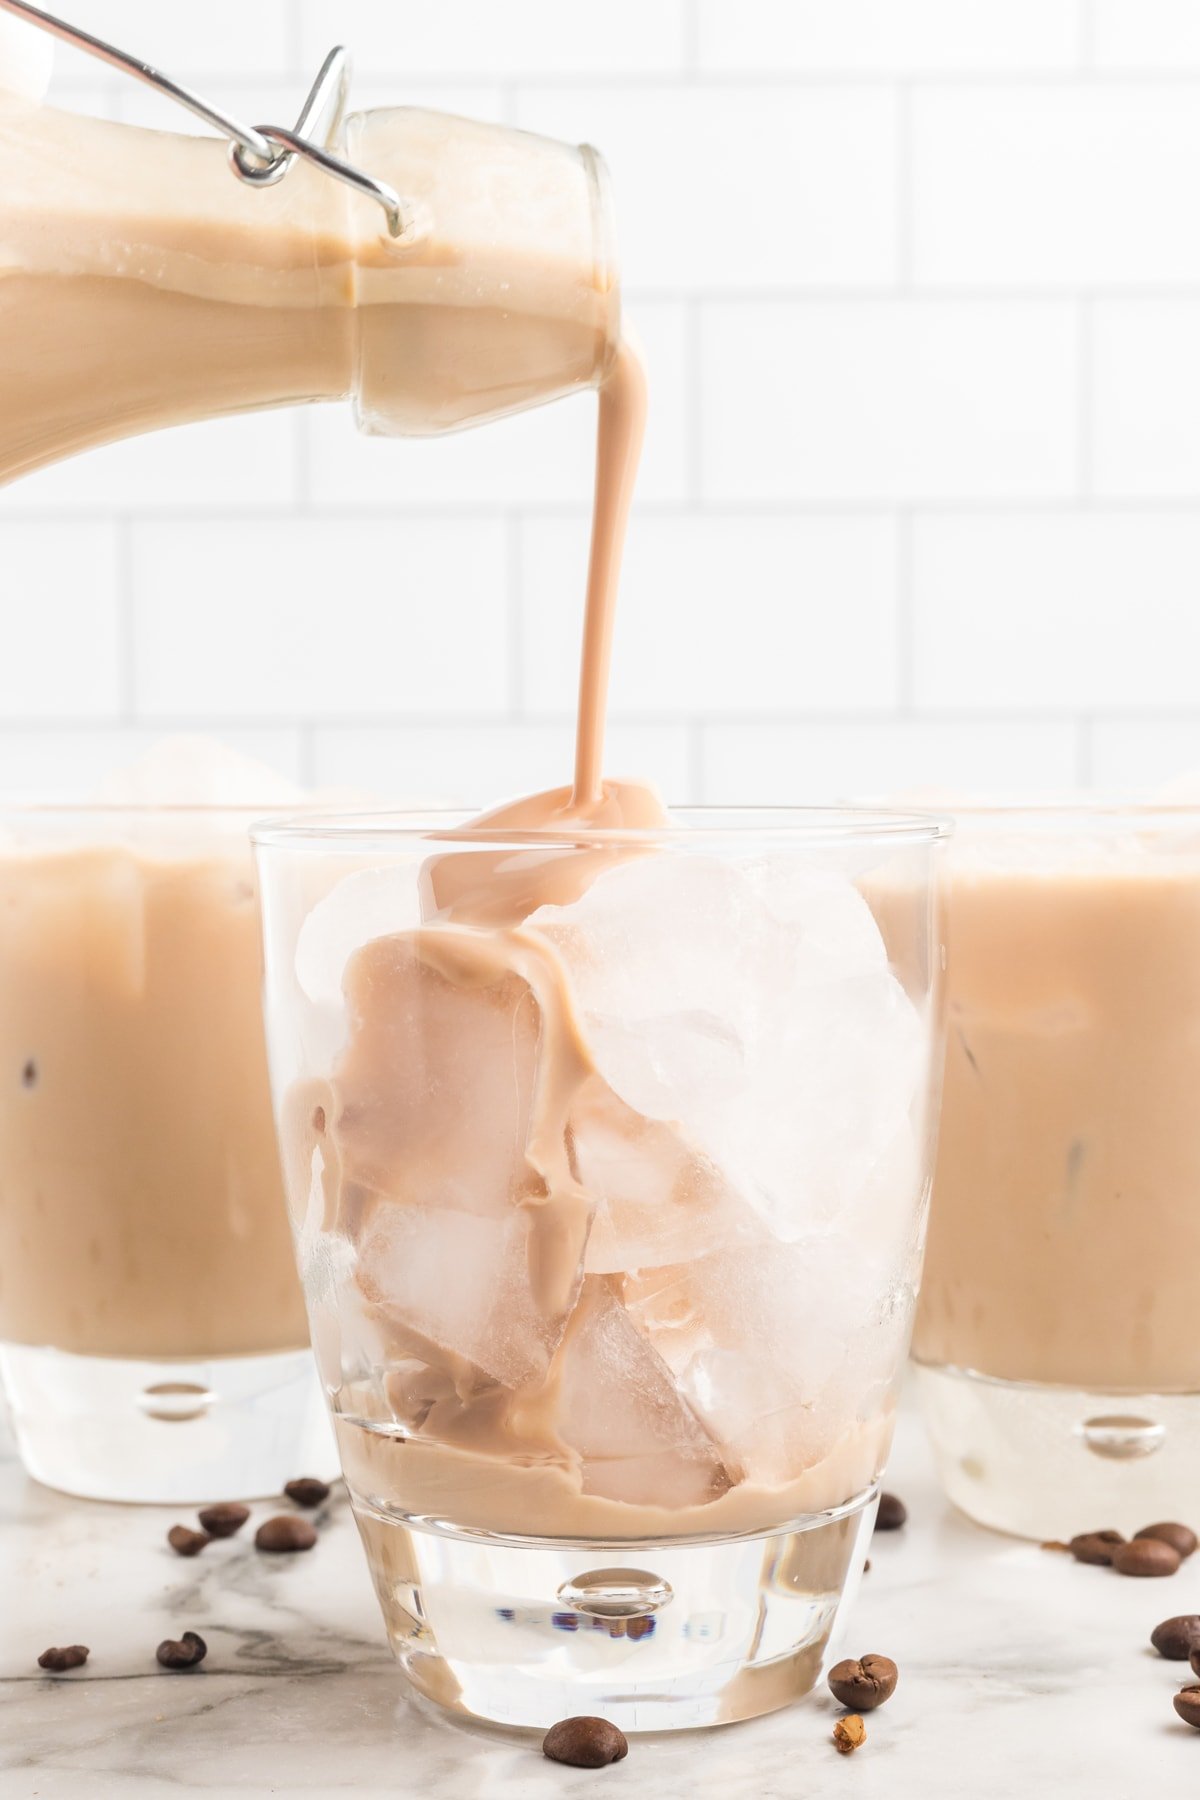 Homemade Baileys being poured over ice